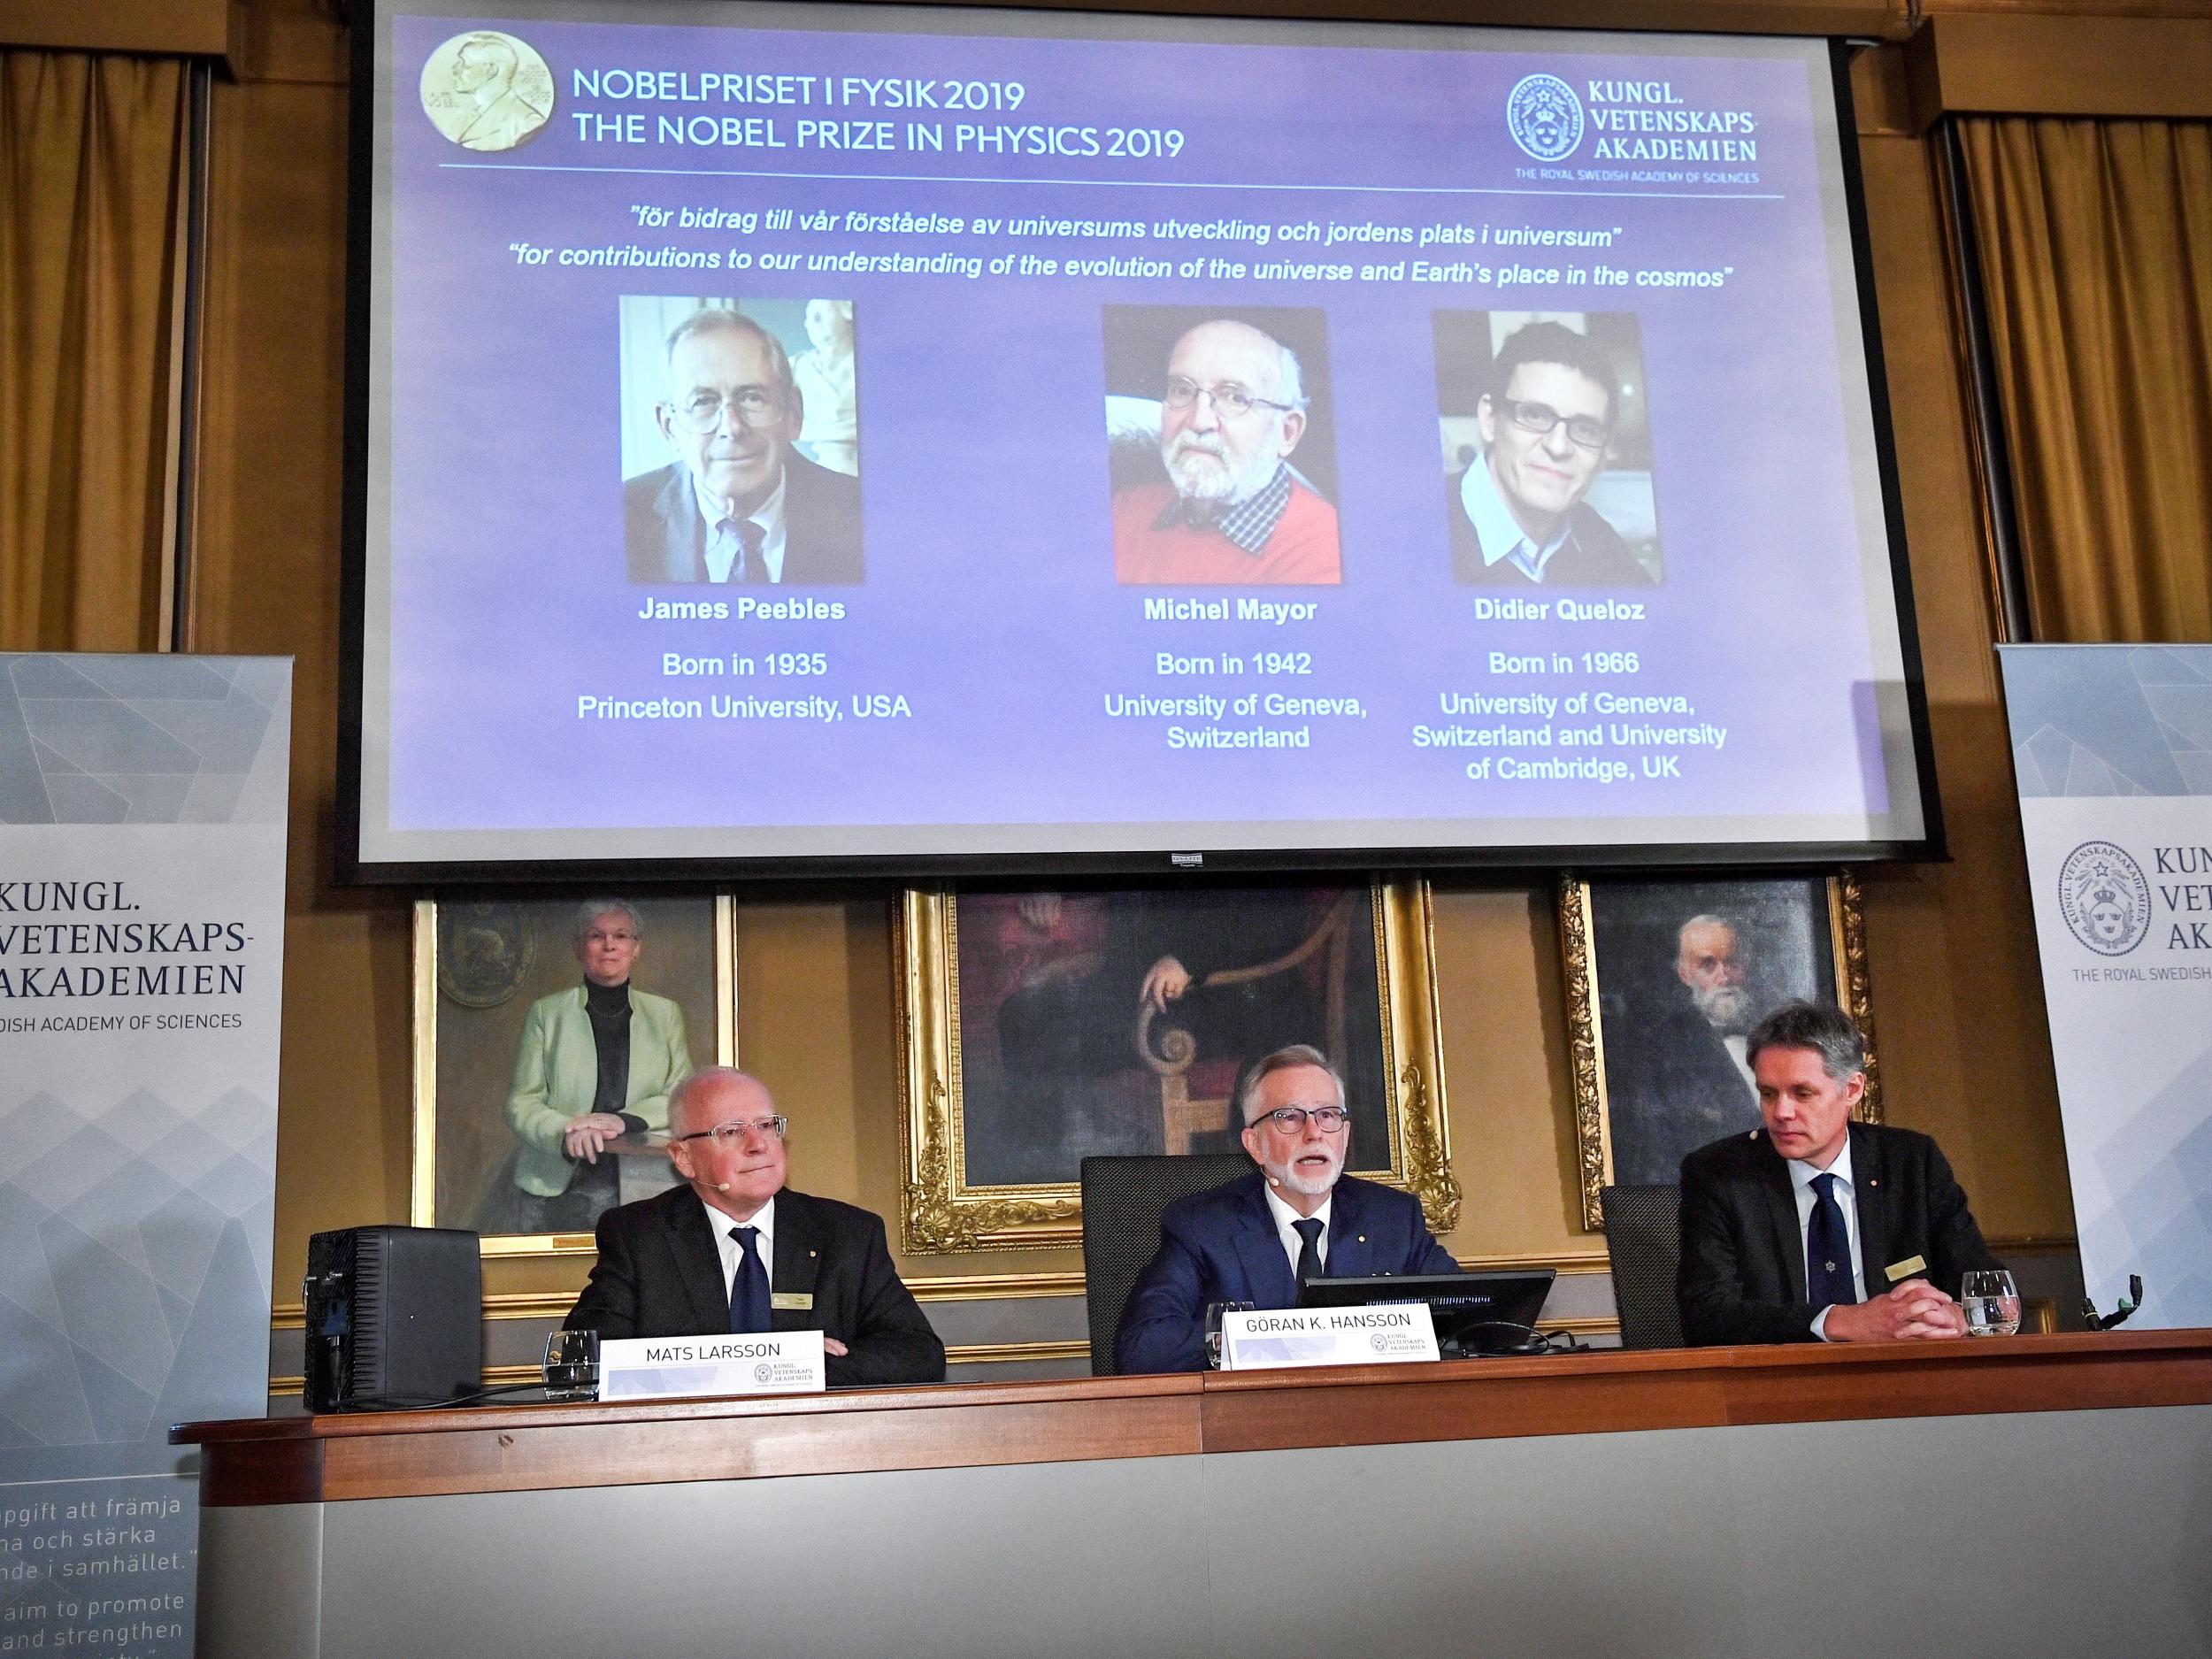 The winners of the 2019 Nobel Prize in Physics were announced at the Royal Swedish Academy of Sciences in Stockholm